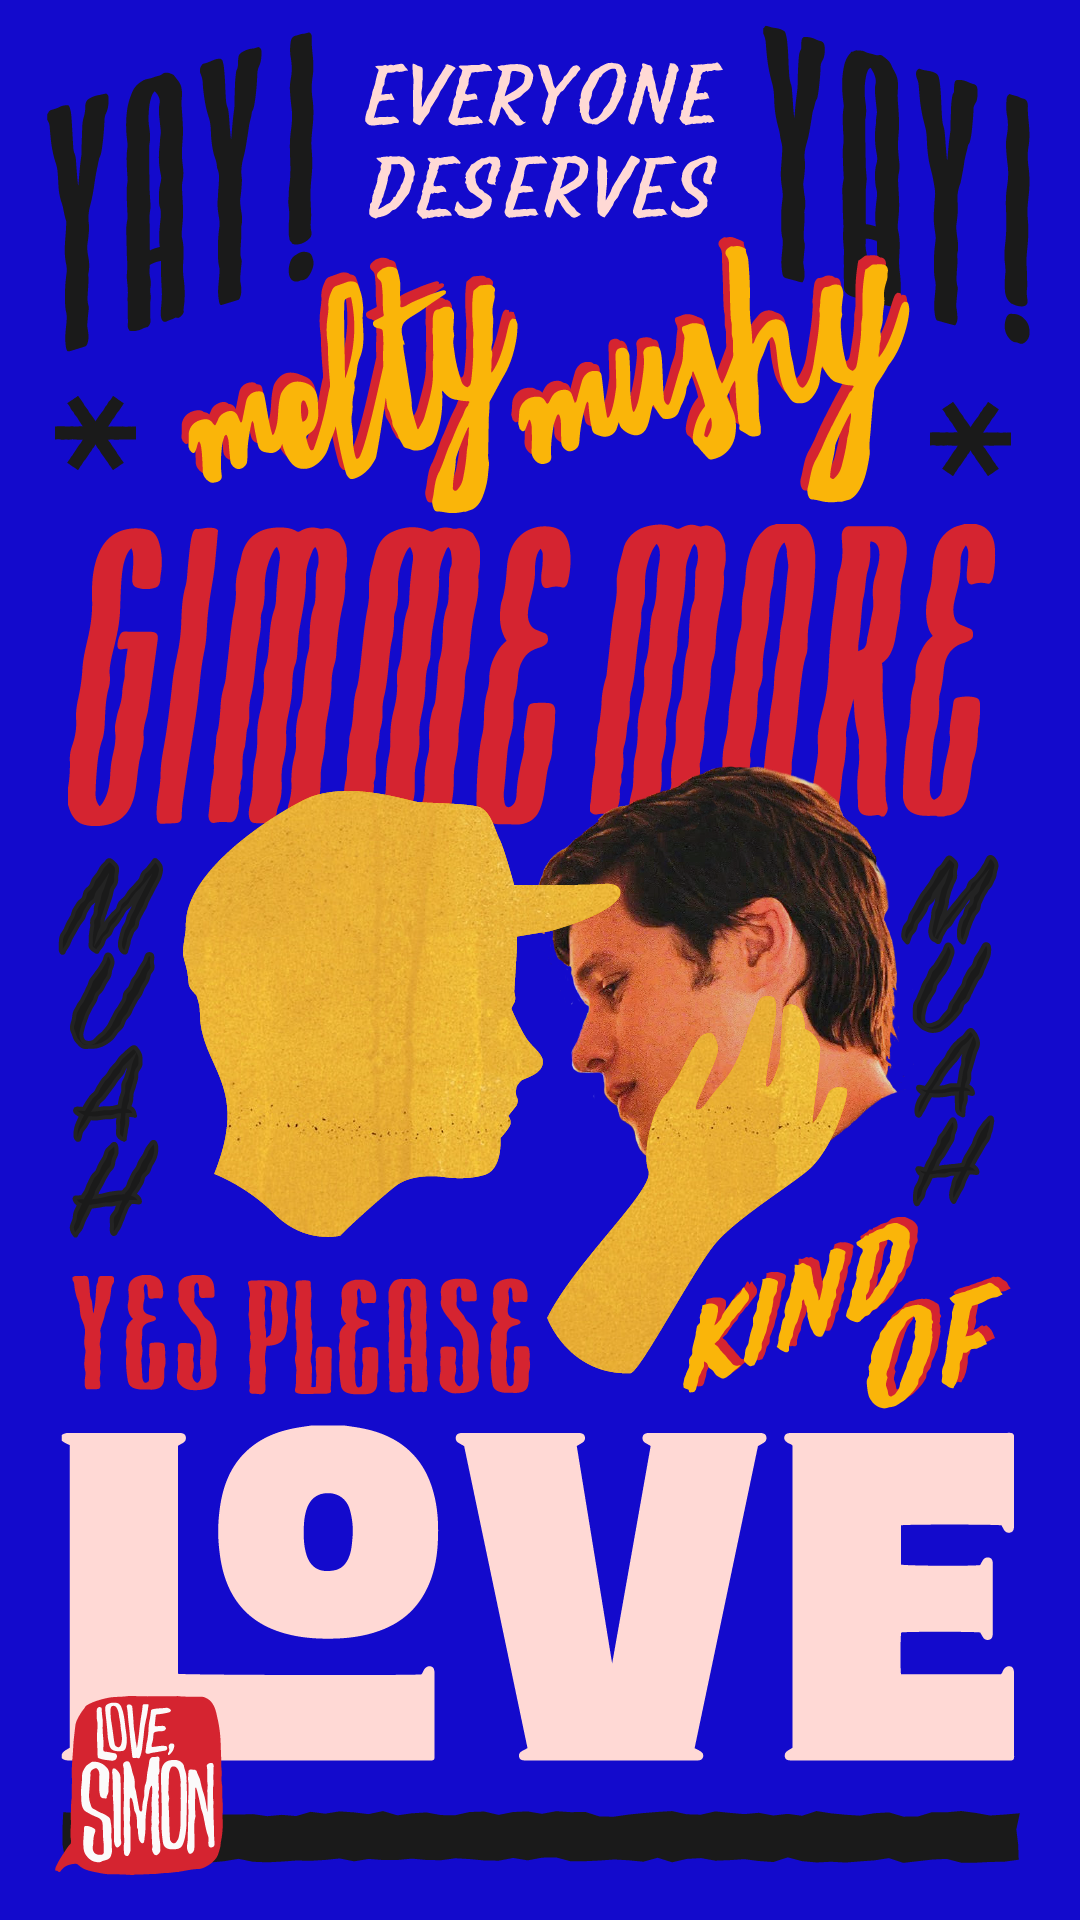 Everyone deserves Gimme More, Yes Please Kind of Love Love Simon Wallpaper for phone by Hoodzpah